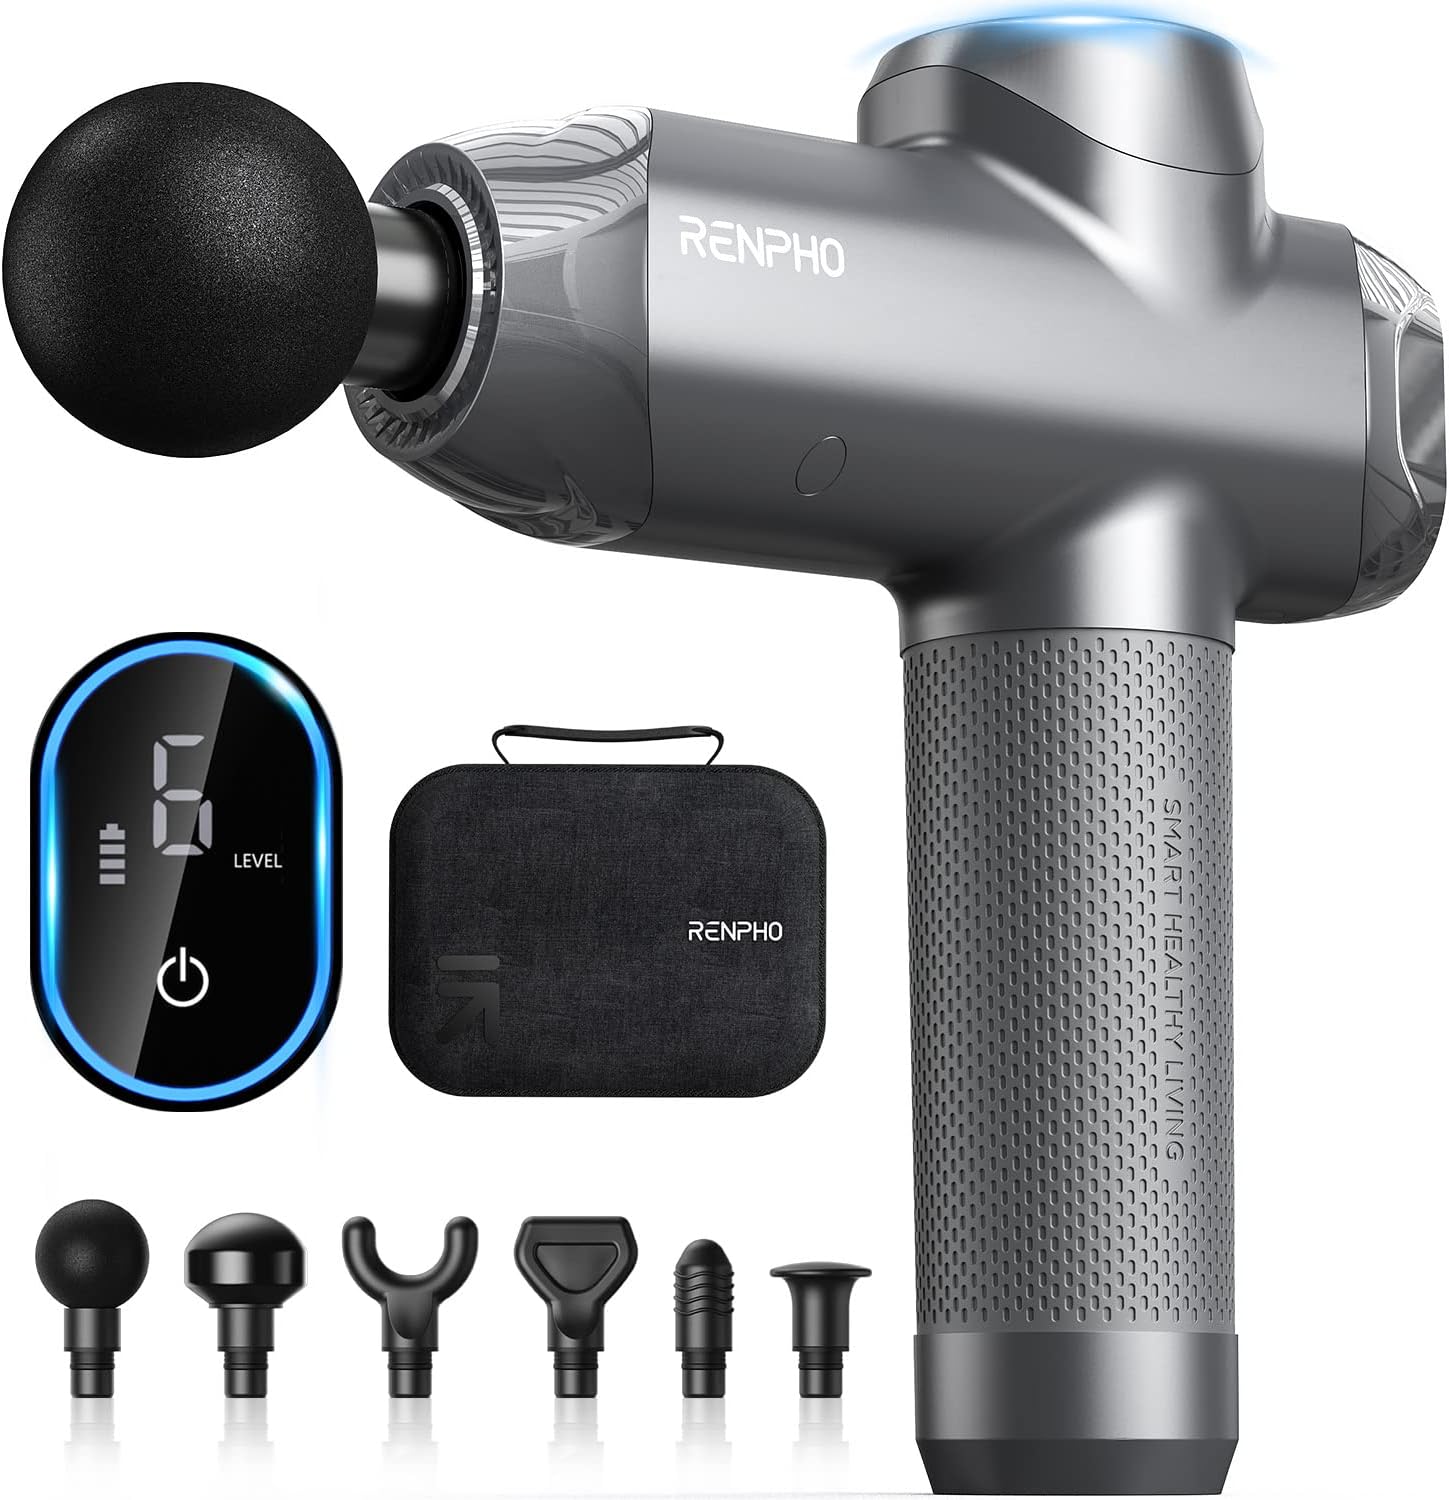 An image showcasing a Renpho EU Power Massage Gun in silver, displayed with five different attachment heads. It includes icons depicting adjustable levels and comes with a black carrying case. The focus is on versatility and